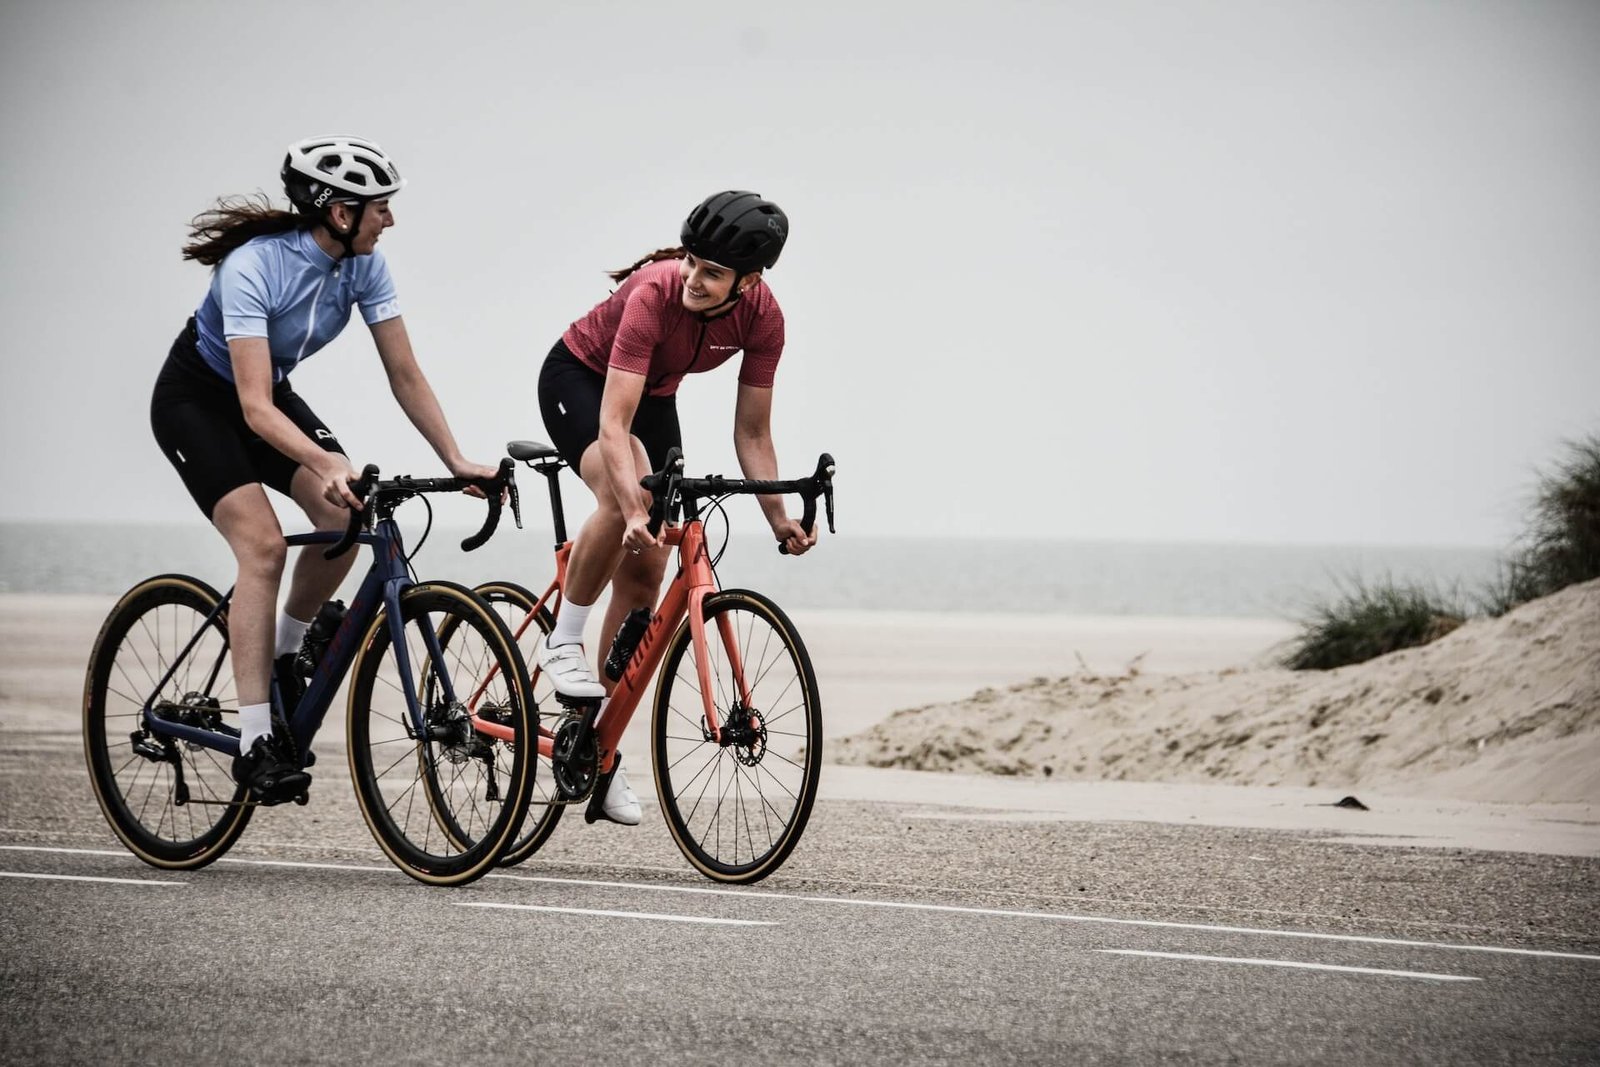 Best cycling clothing brands: Our pick of the top companies making